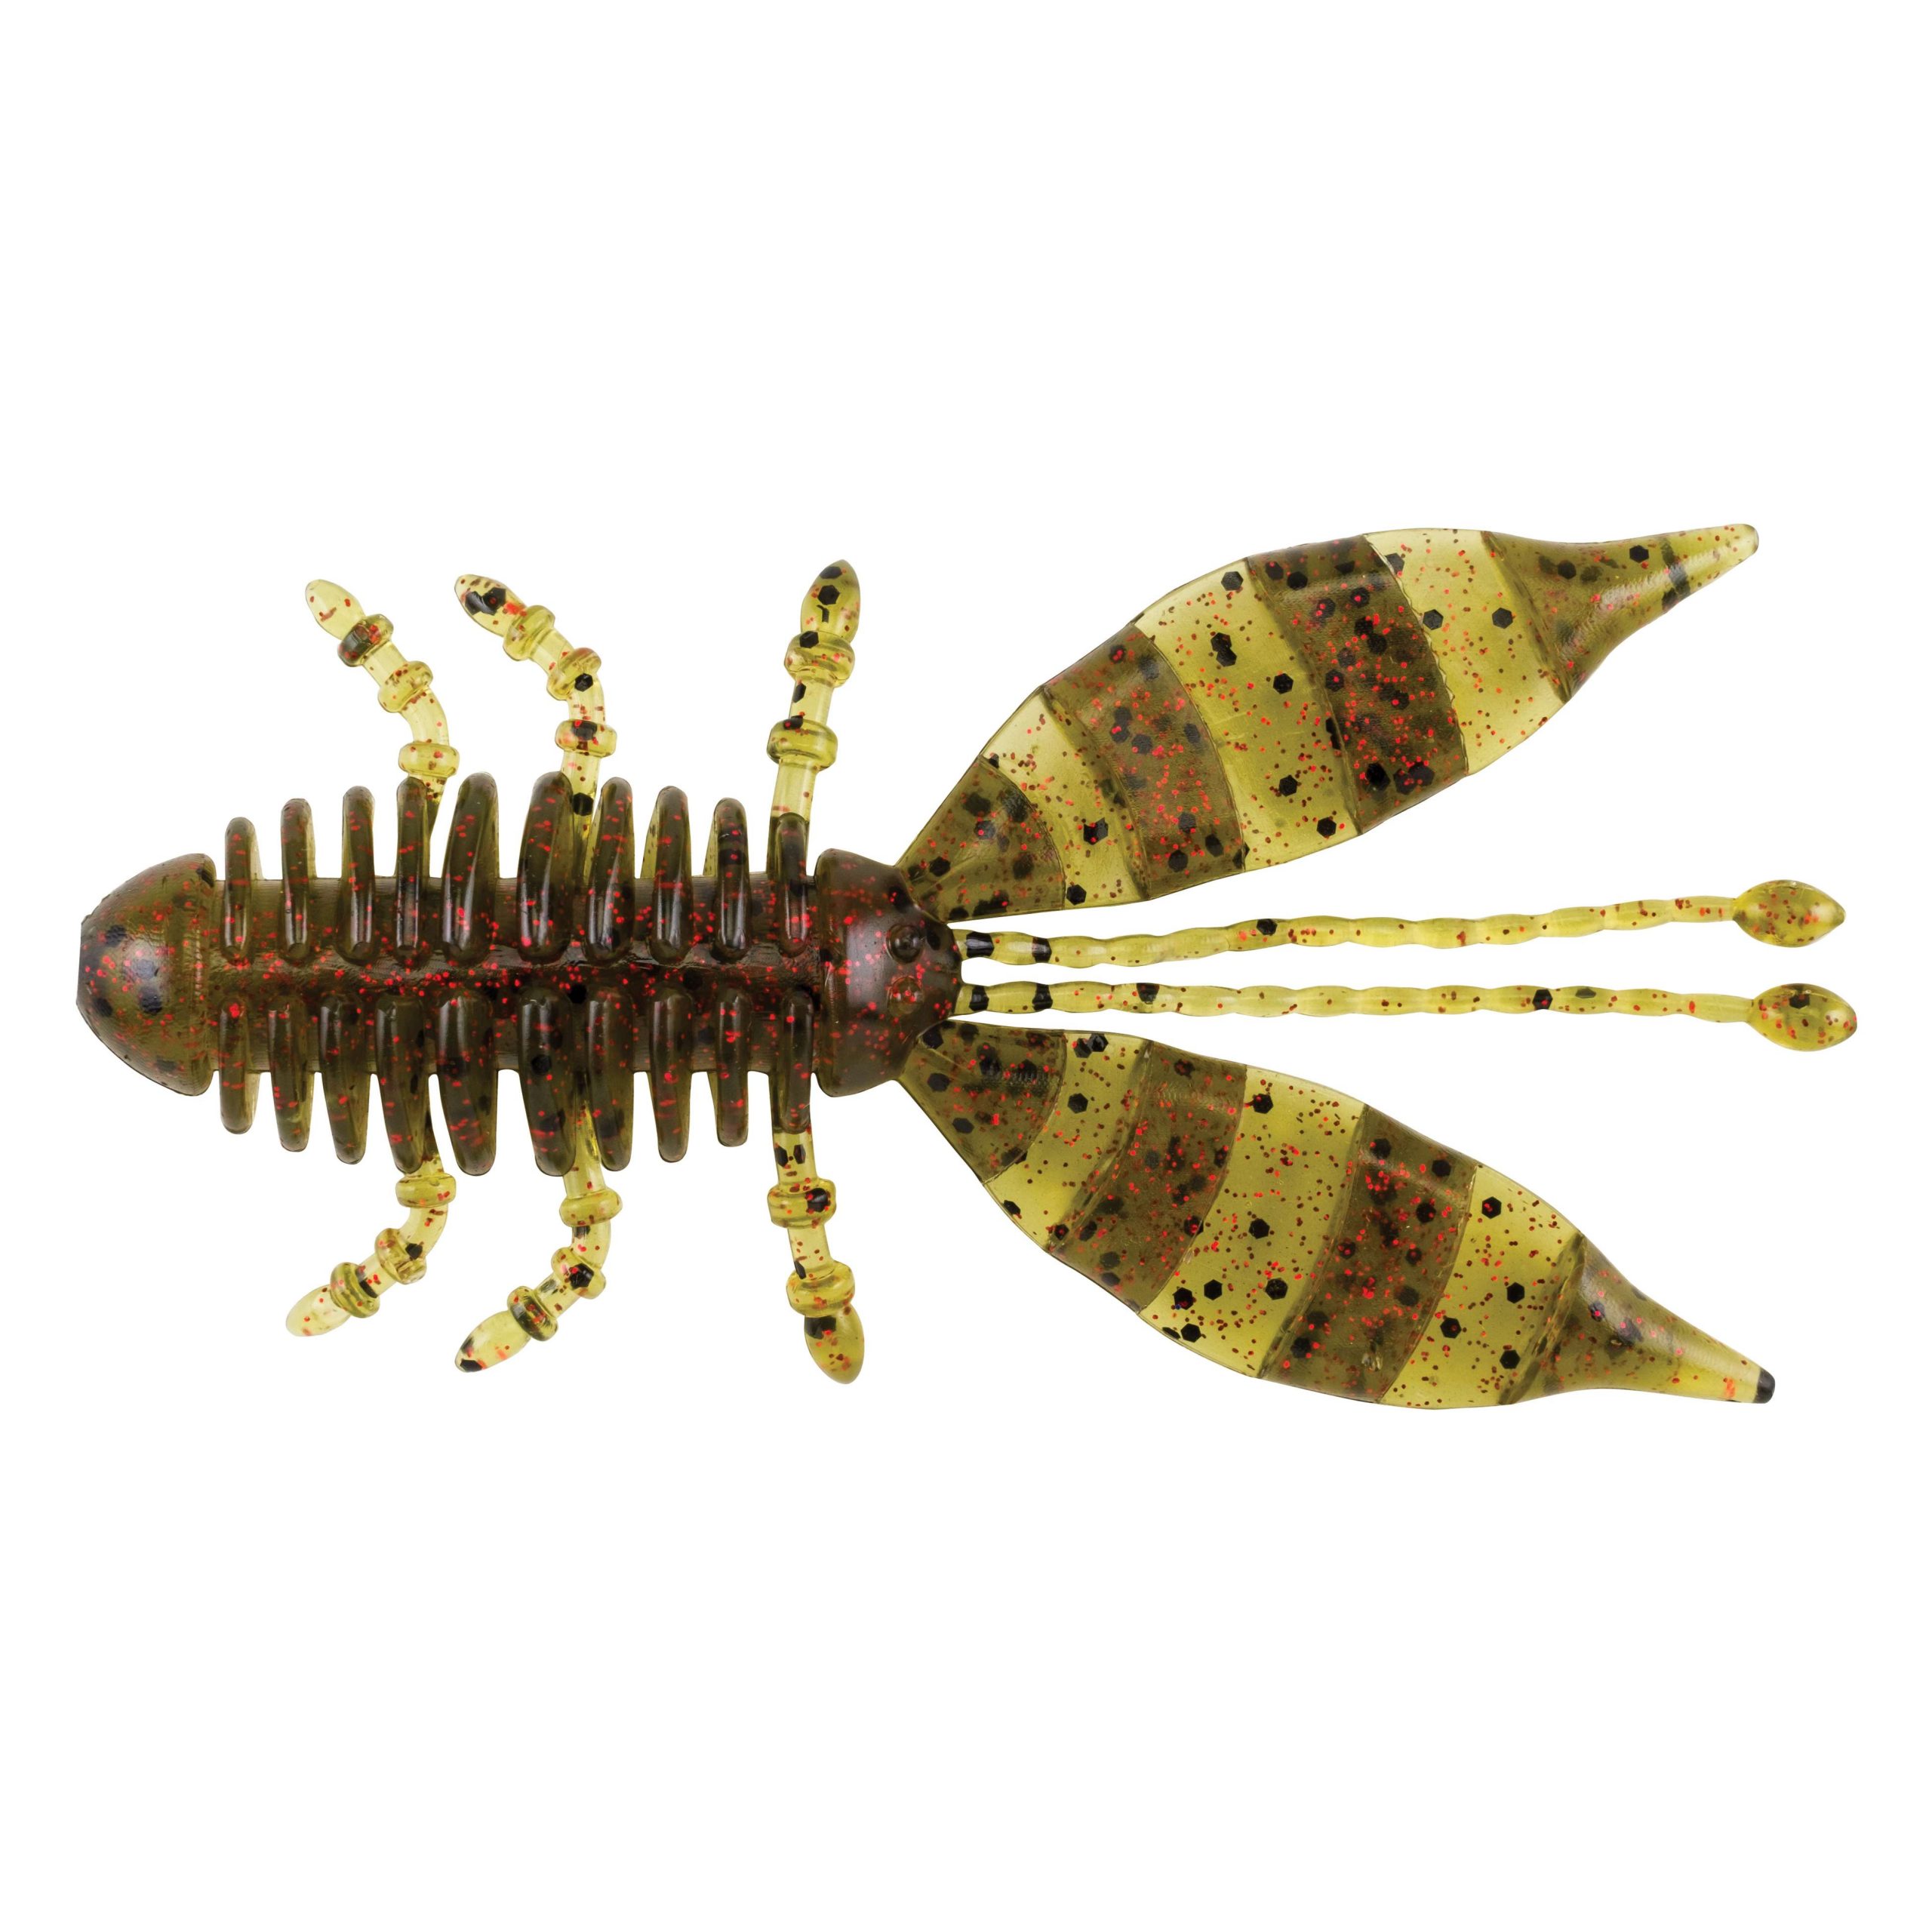 Powerbait Jester<br>
Berkley<br>
$3.99<br>
With Japanese inspired shape and action, the Berkley PowerBait Jester has tons of surface area to create maximum flavor. Great on wobble head jigs with optimal color design options.	